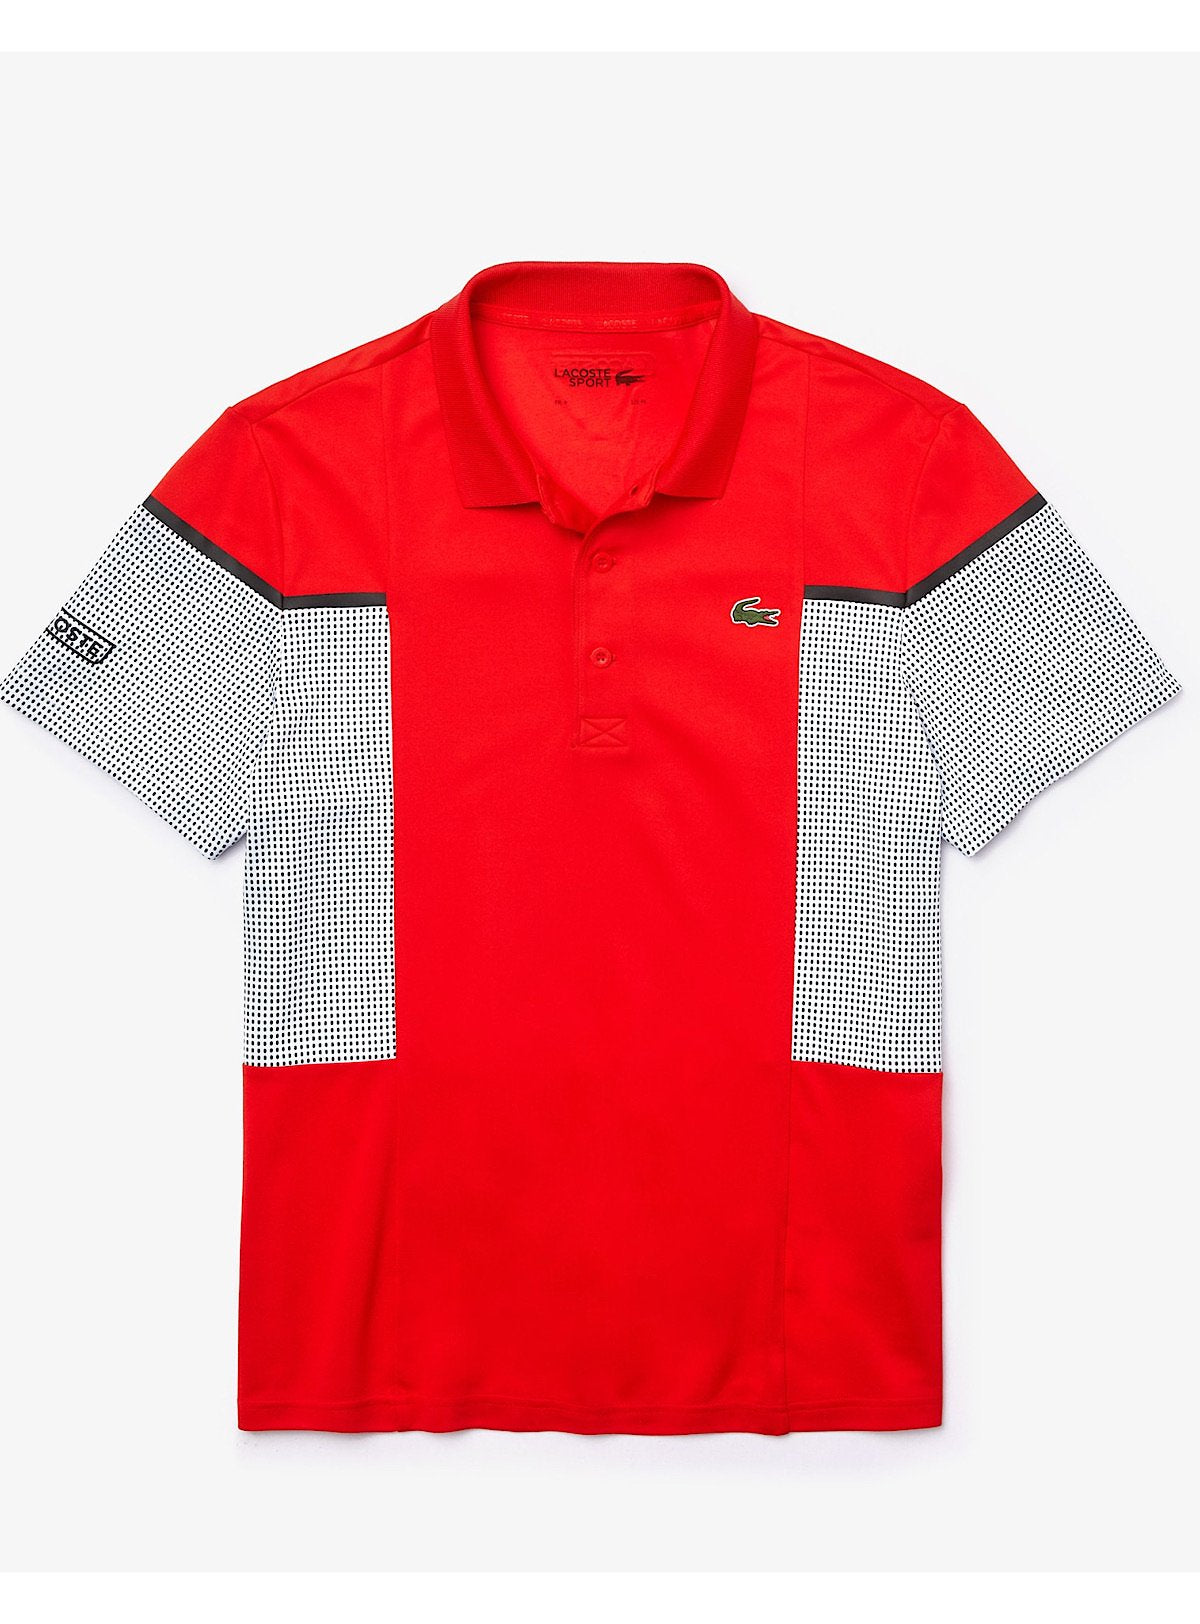 lacoste red polo shirt